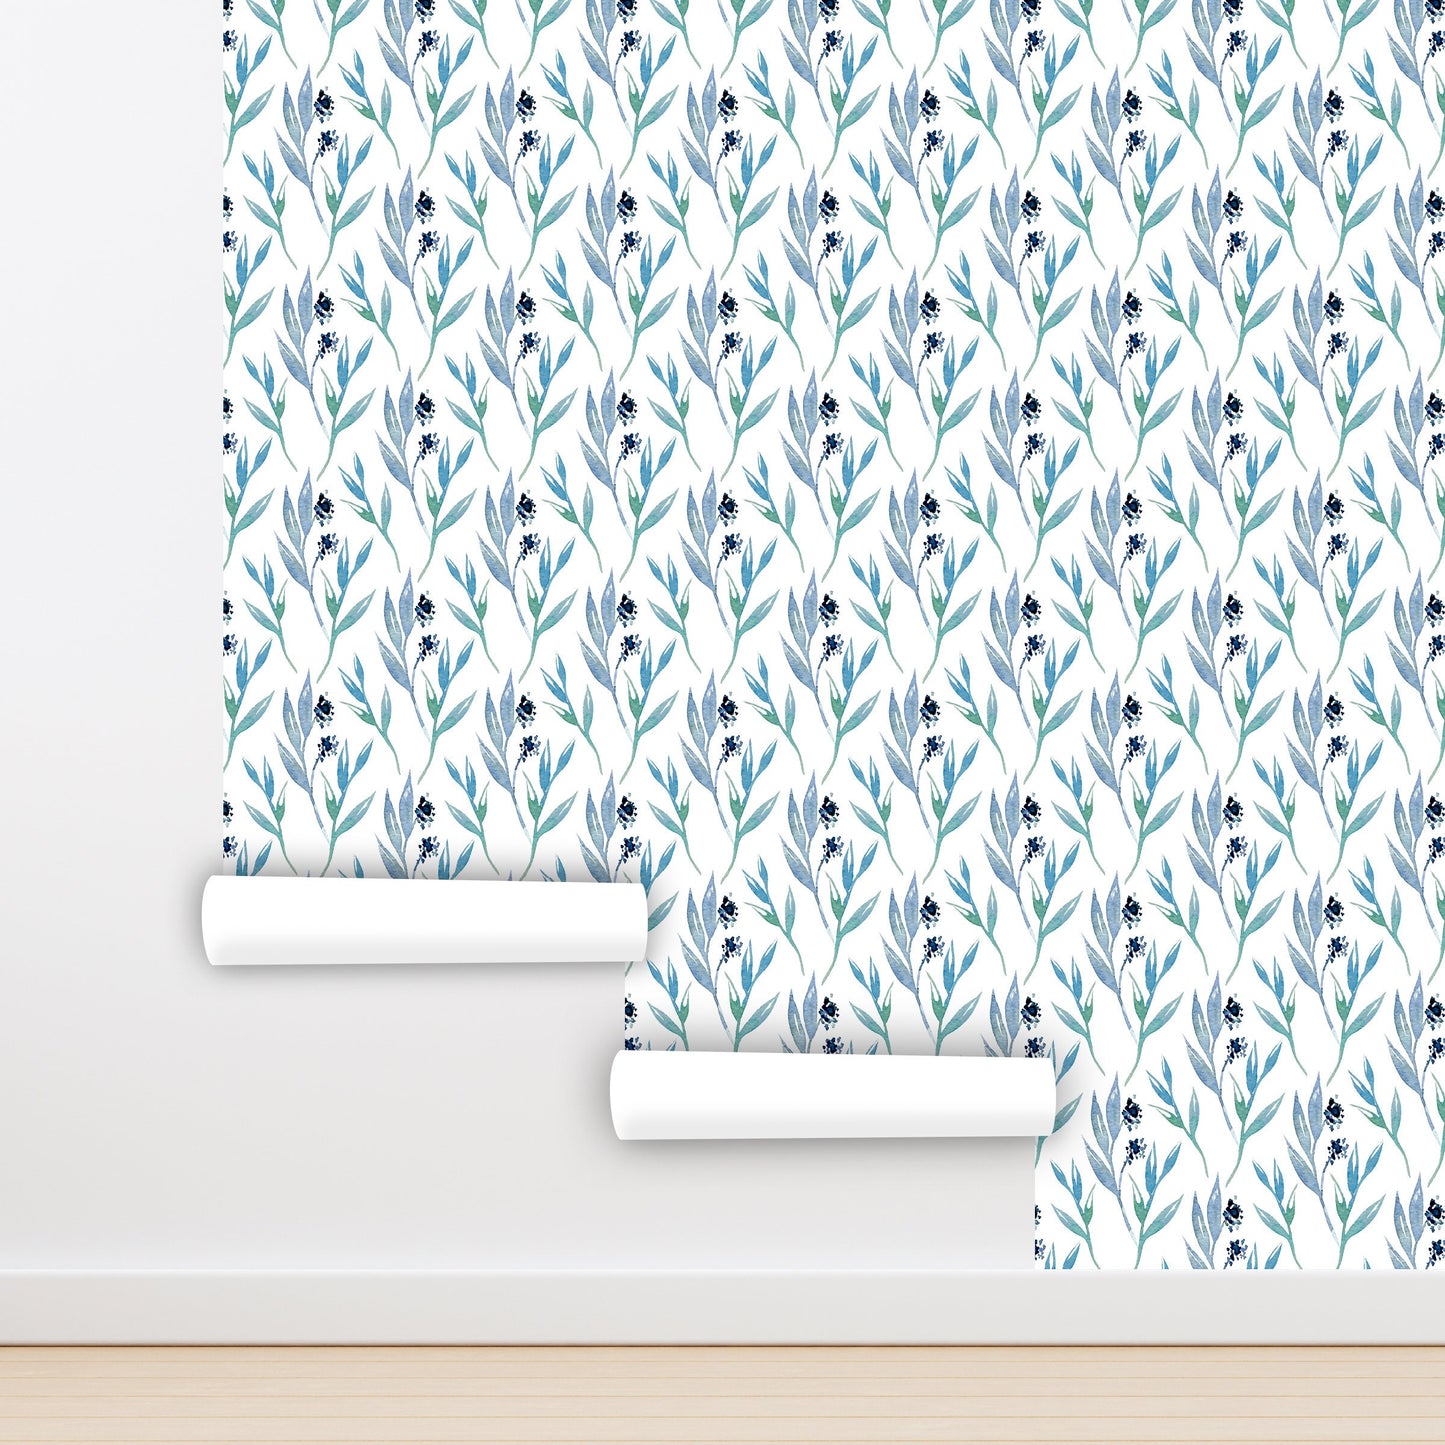 Wildflower Wallpaper Peel and Stick, Blue Floral Wallpaper, Removable Wall Paper